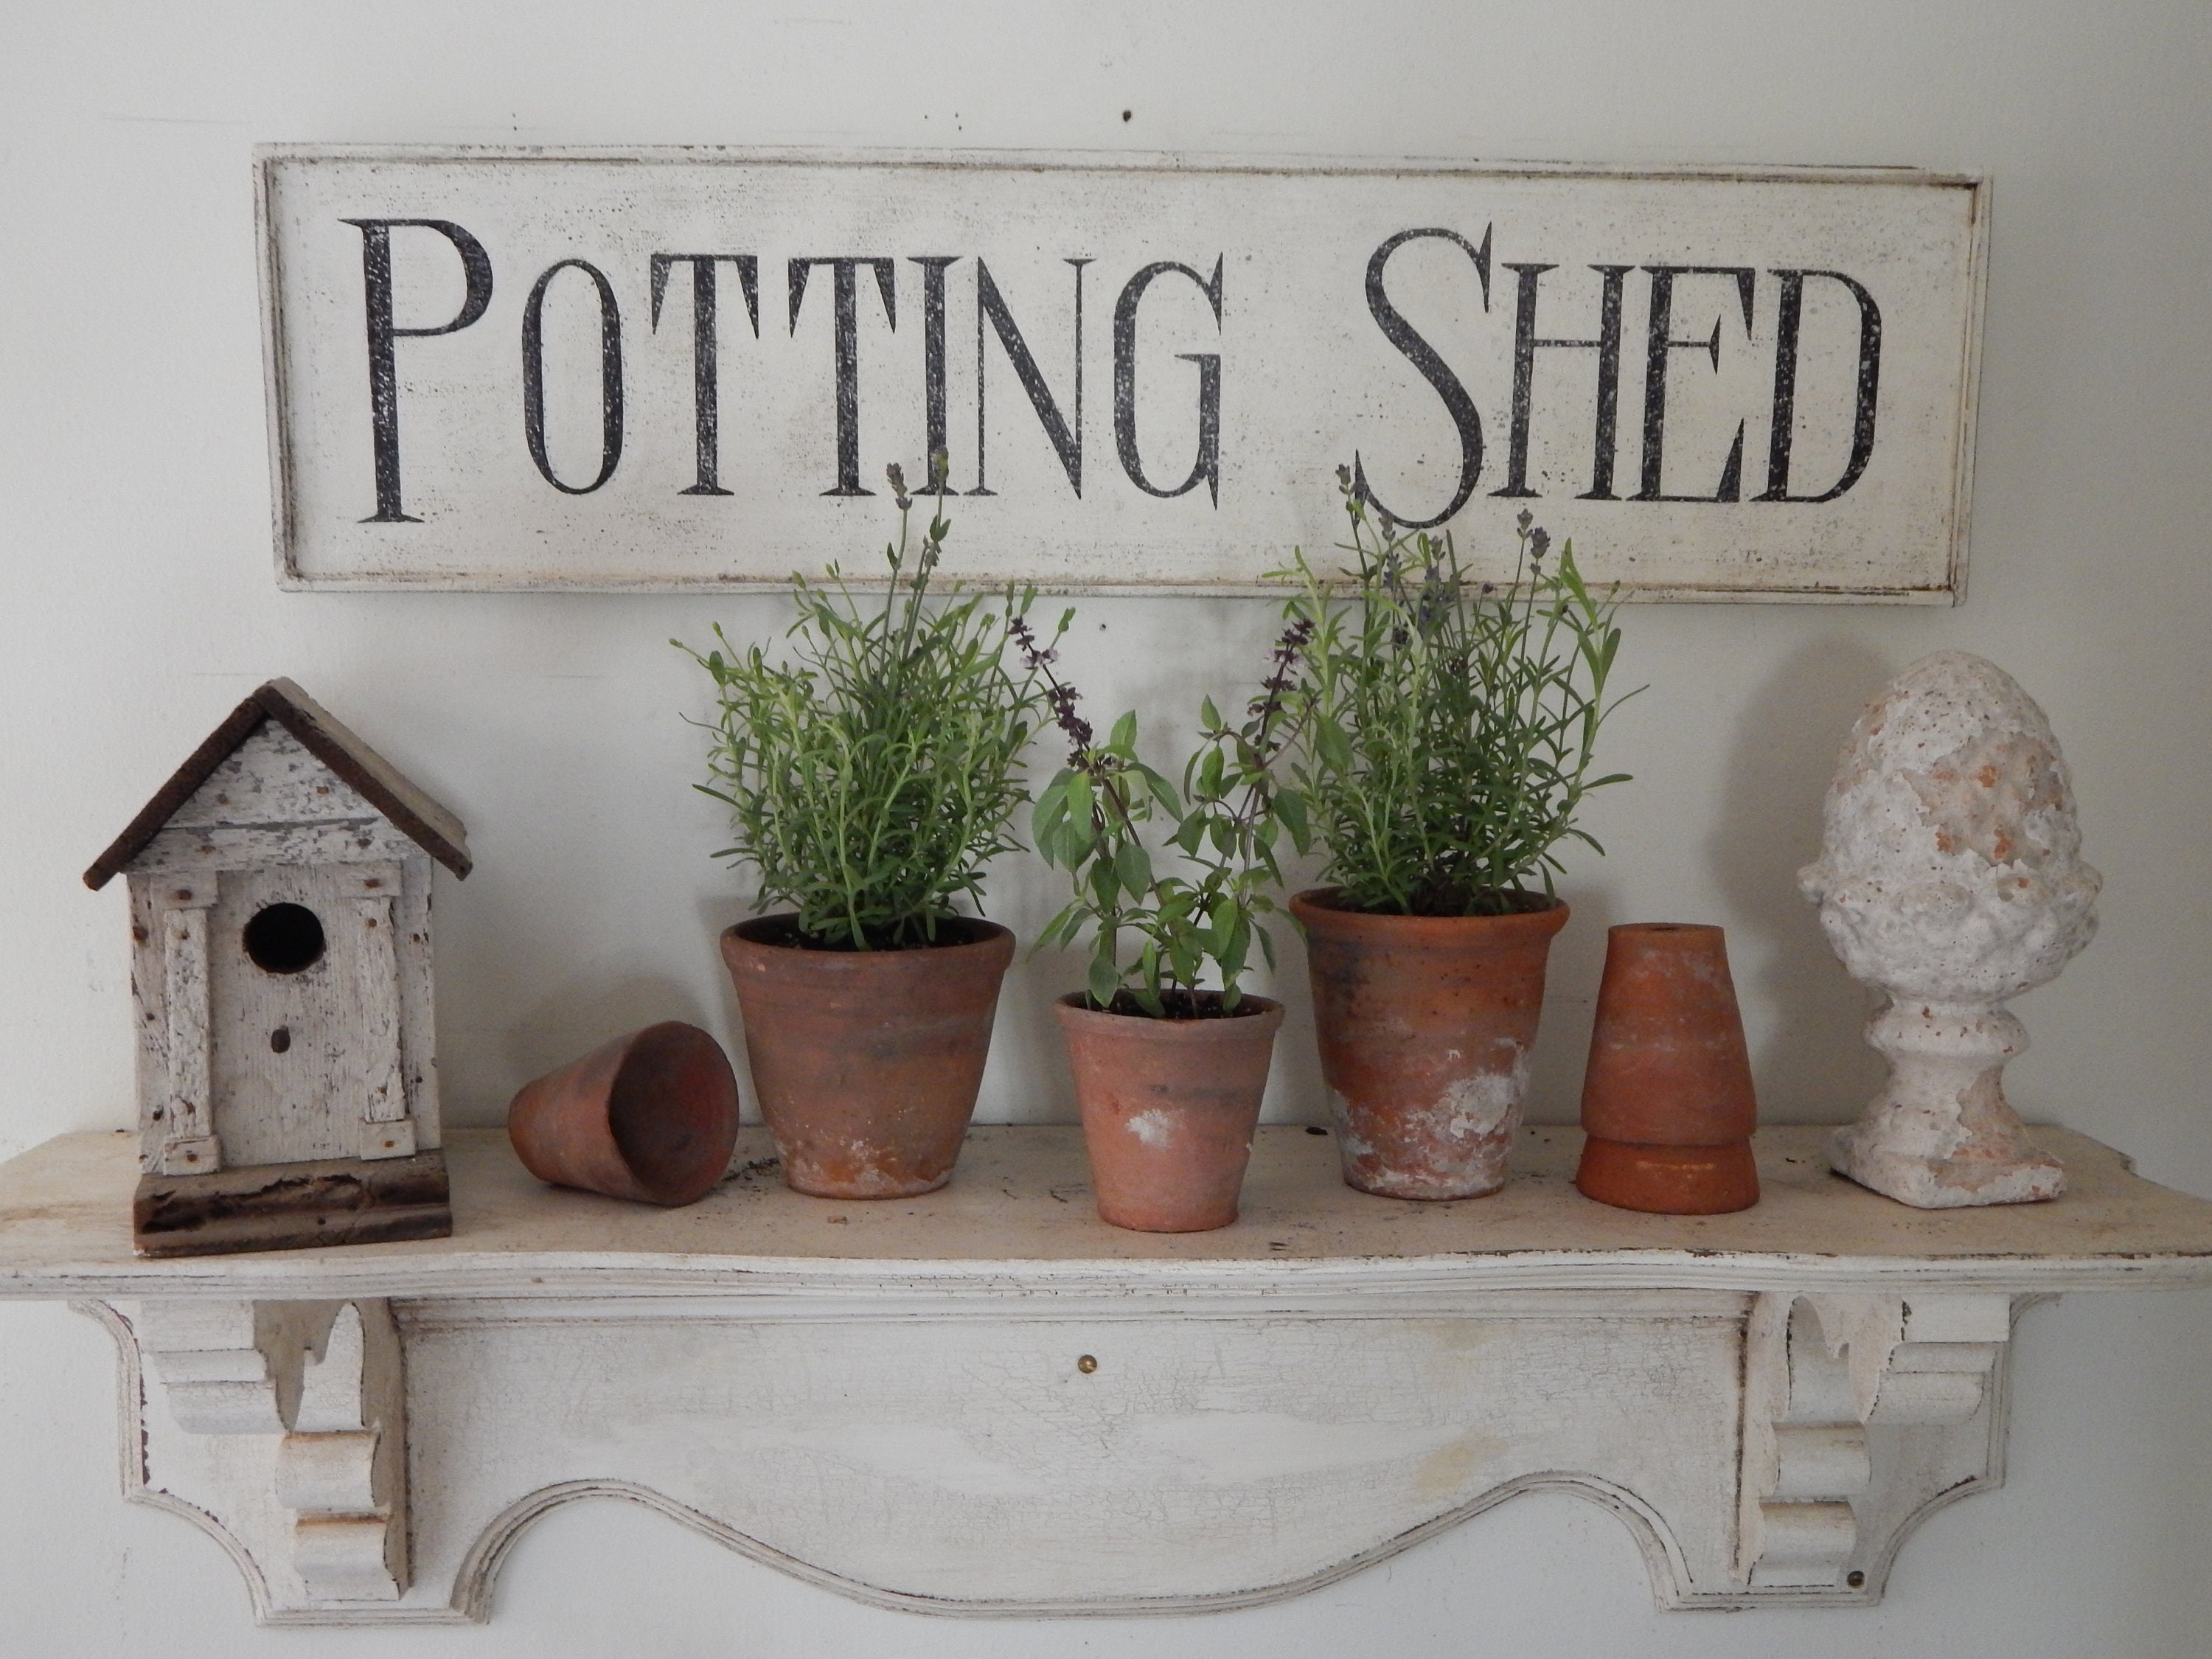 Derles wood POTTING SHED SIGN vintage style signs hand made signs farmhouse decor distressed signs garden signs farmhouse signs wood sign